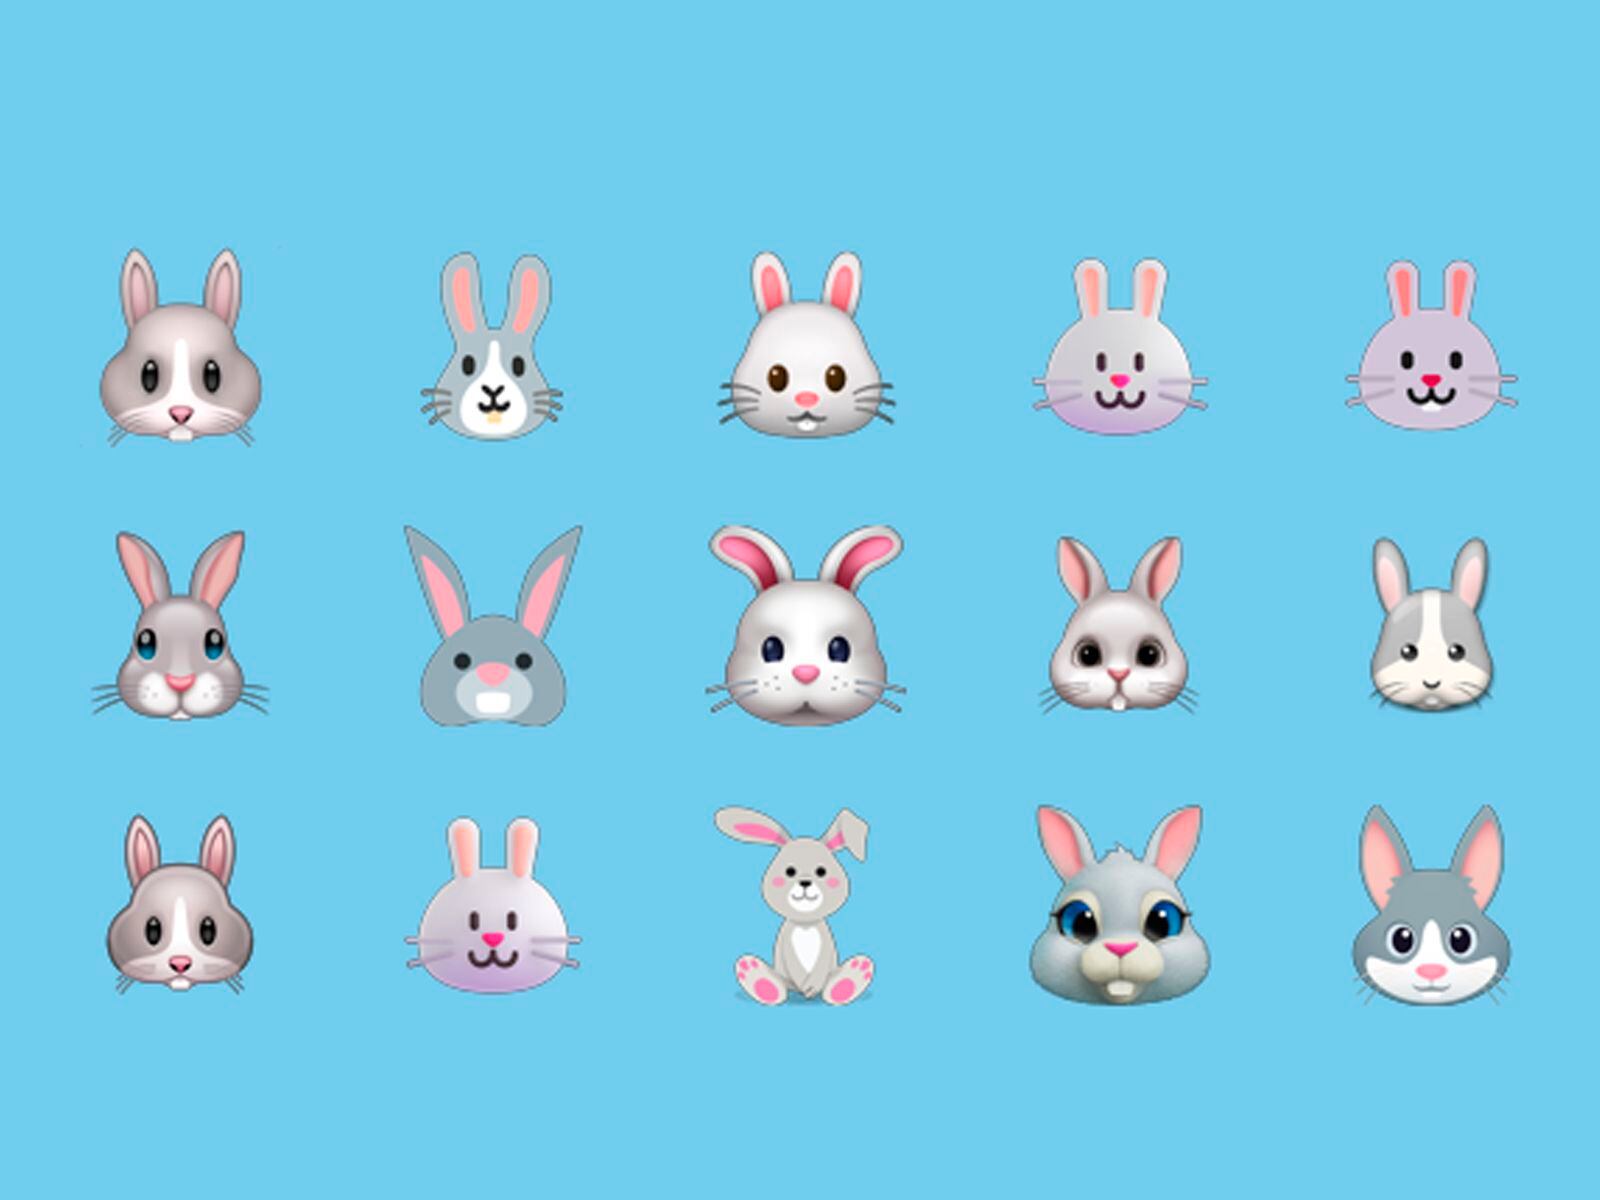 WHATSAPP |  This is how the rabbit is represented on various platforms other than WhatsApp.  (Photo: Emojipedia)